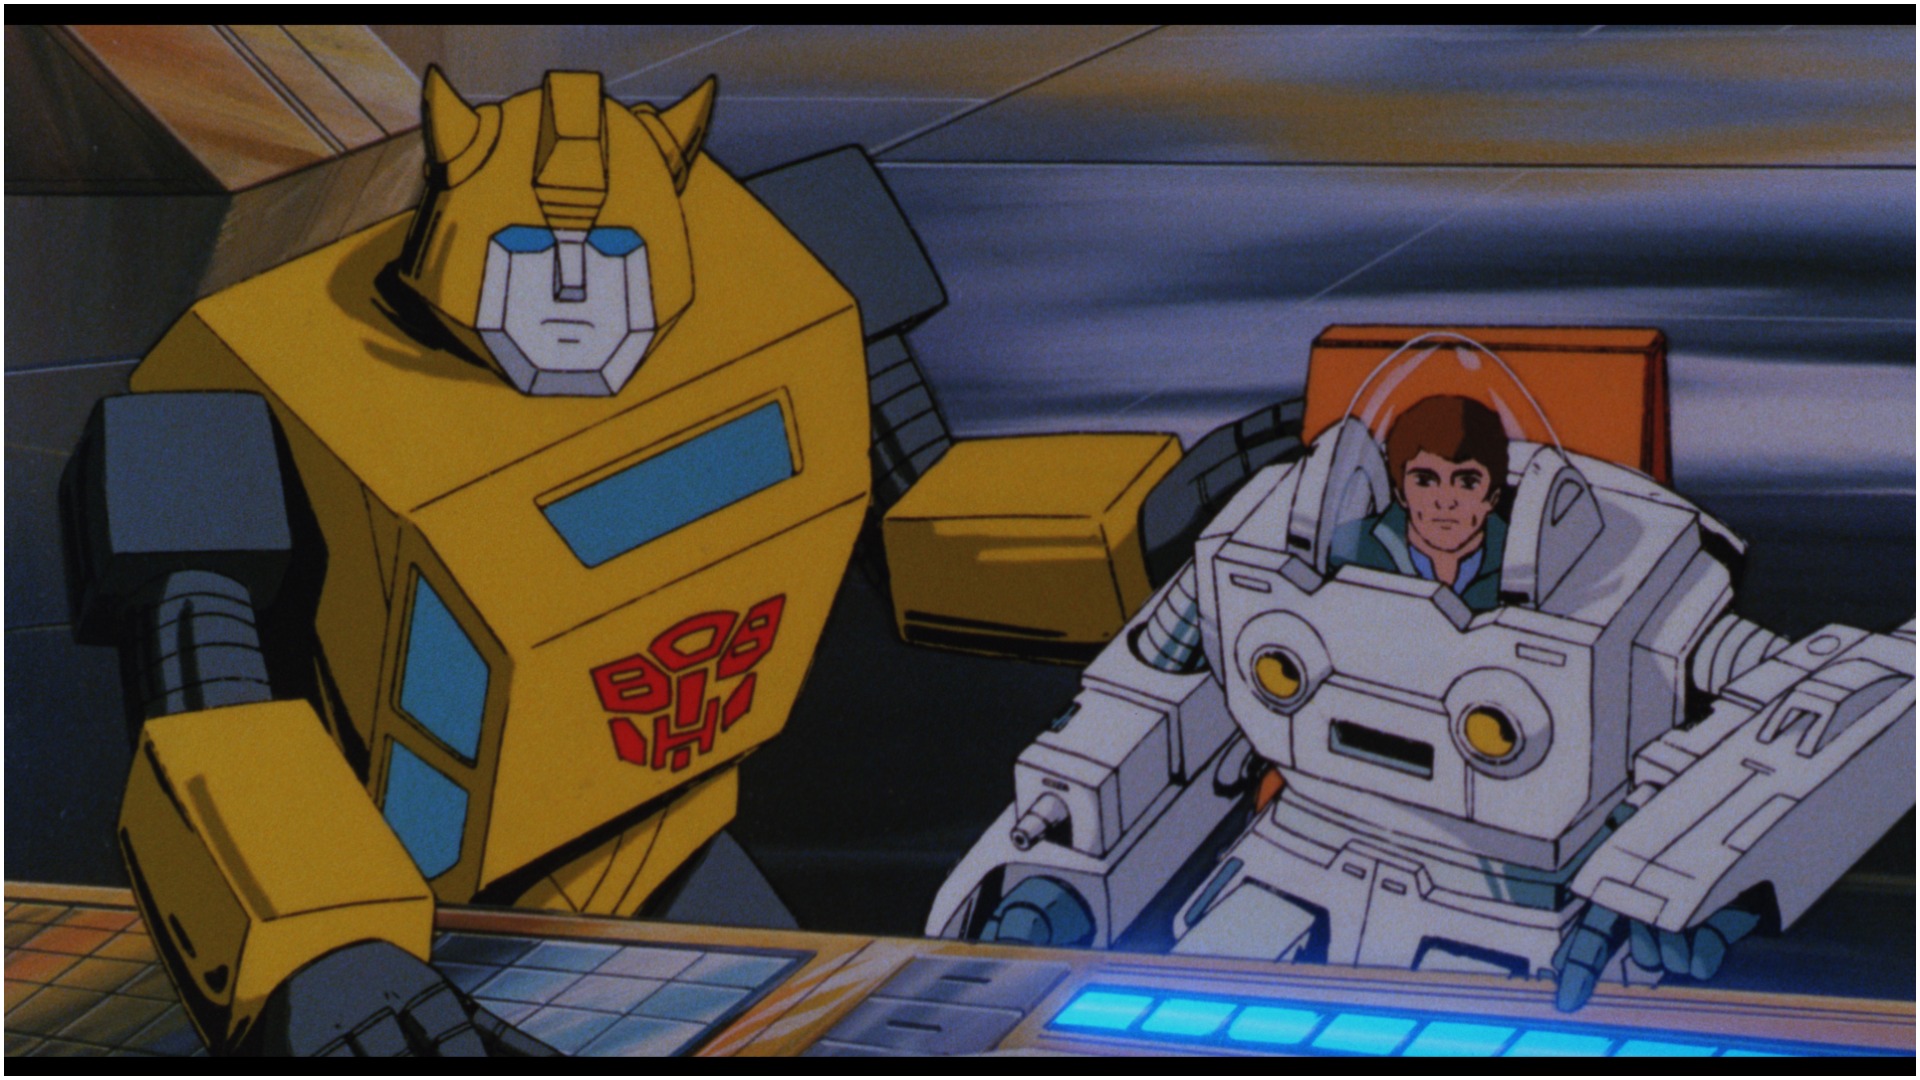 The Transformers: The Movie (1986) Movie Review